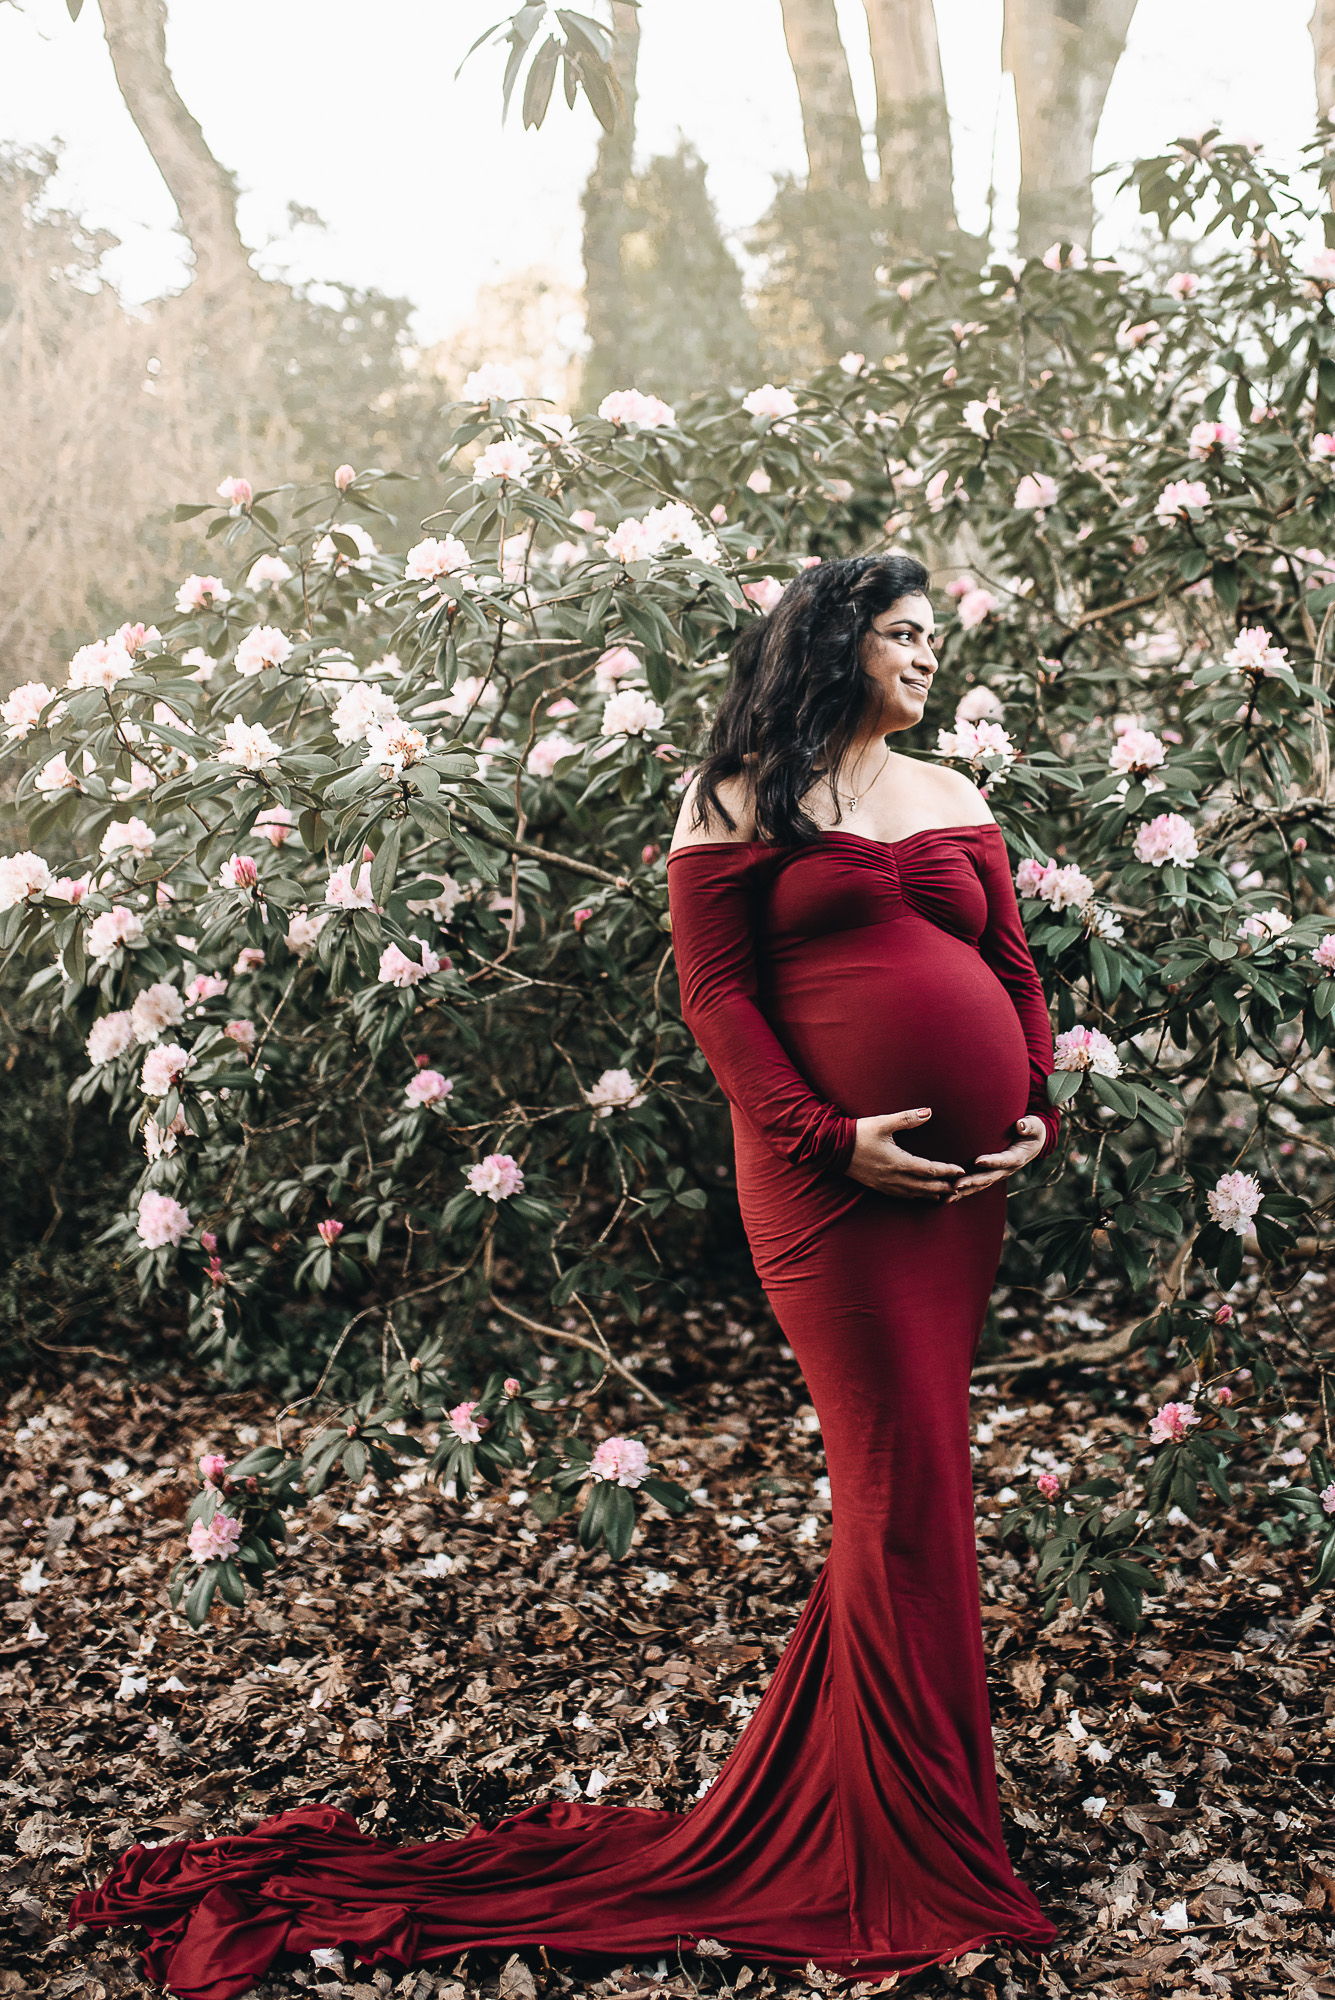 Maternity Photo Shoot | Swansea | South Wales | Our Beautiful Adventure Photography (Copy)